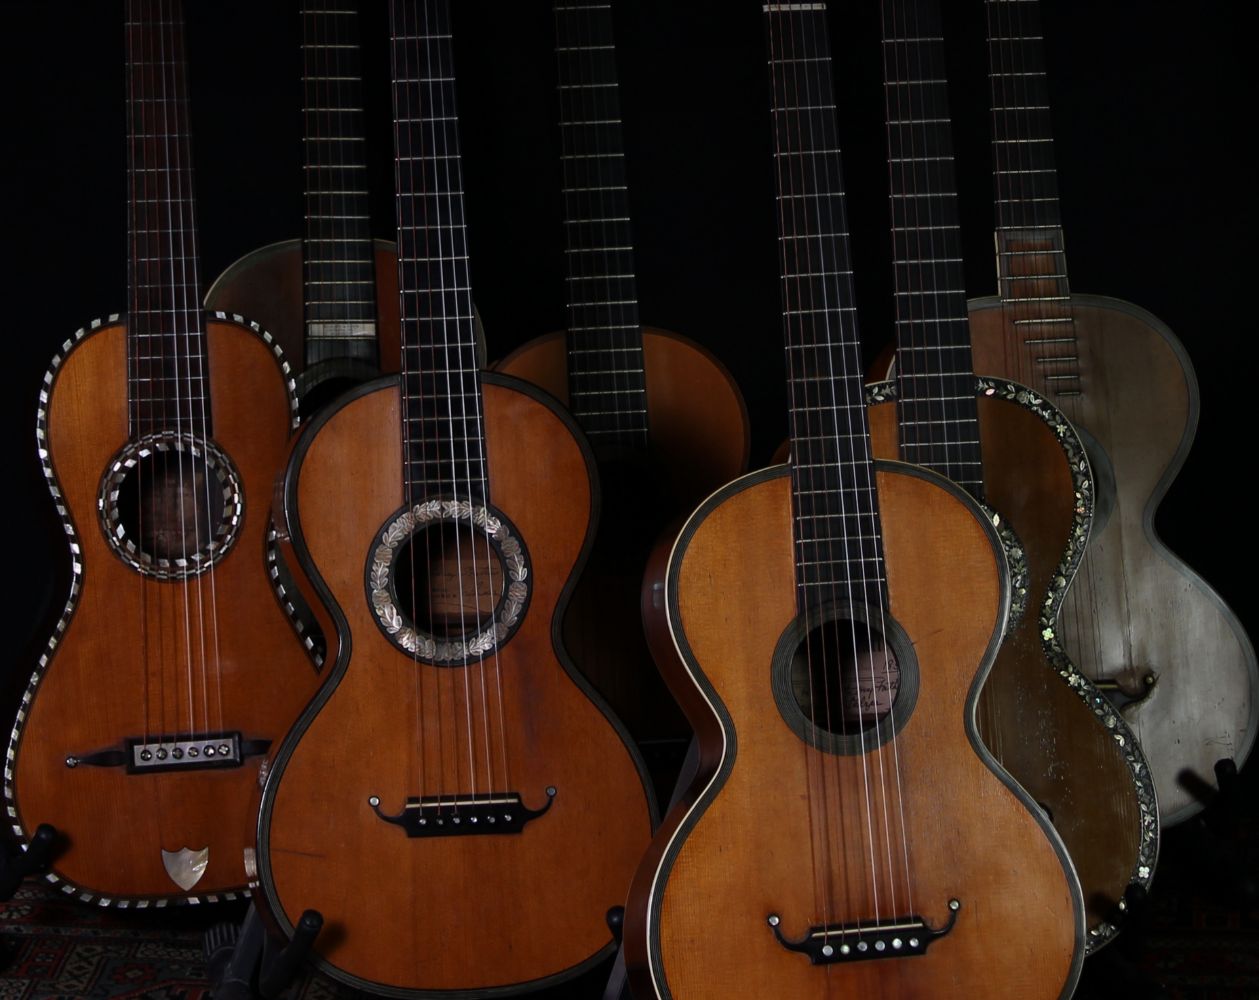 The Guitar Auction - Day Three - Antique & Classical Guitars